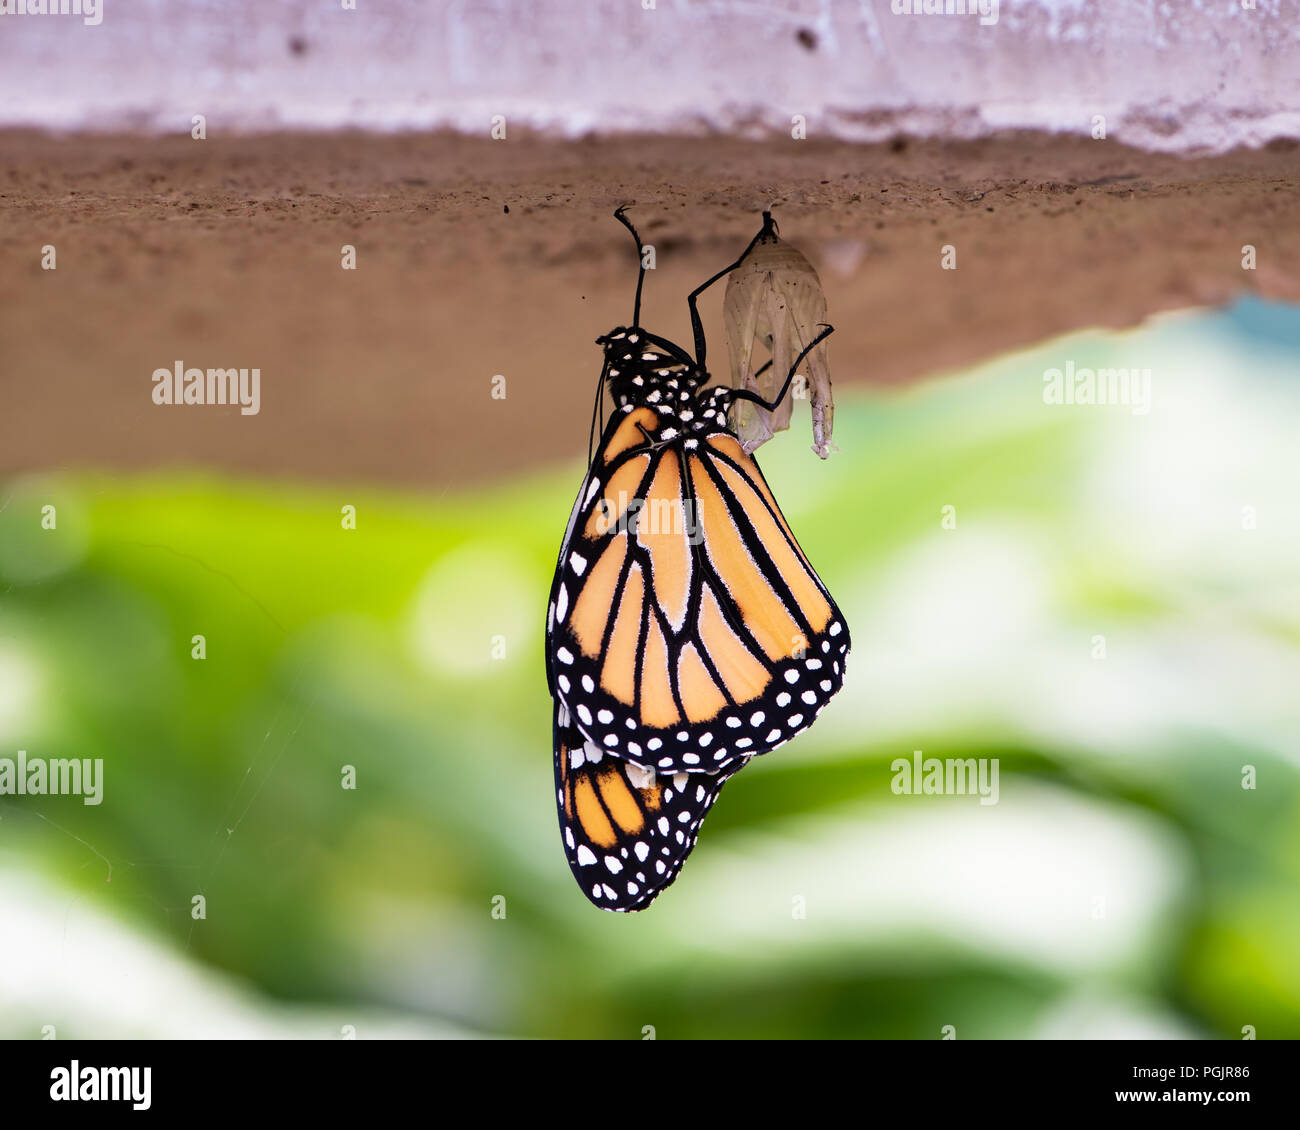 A Monarch butterfly, danaus plexippus, just emerging from the chrysalis stage hanging under a concrete bench in a garden in Speculator, NY USA Stock Photo